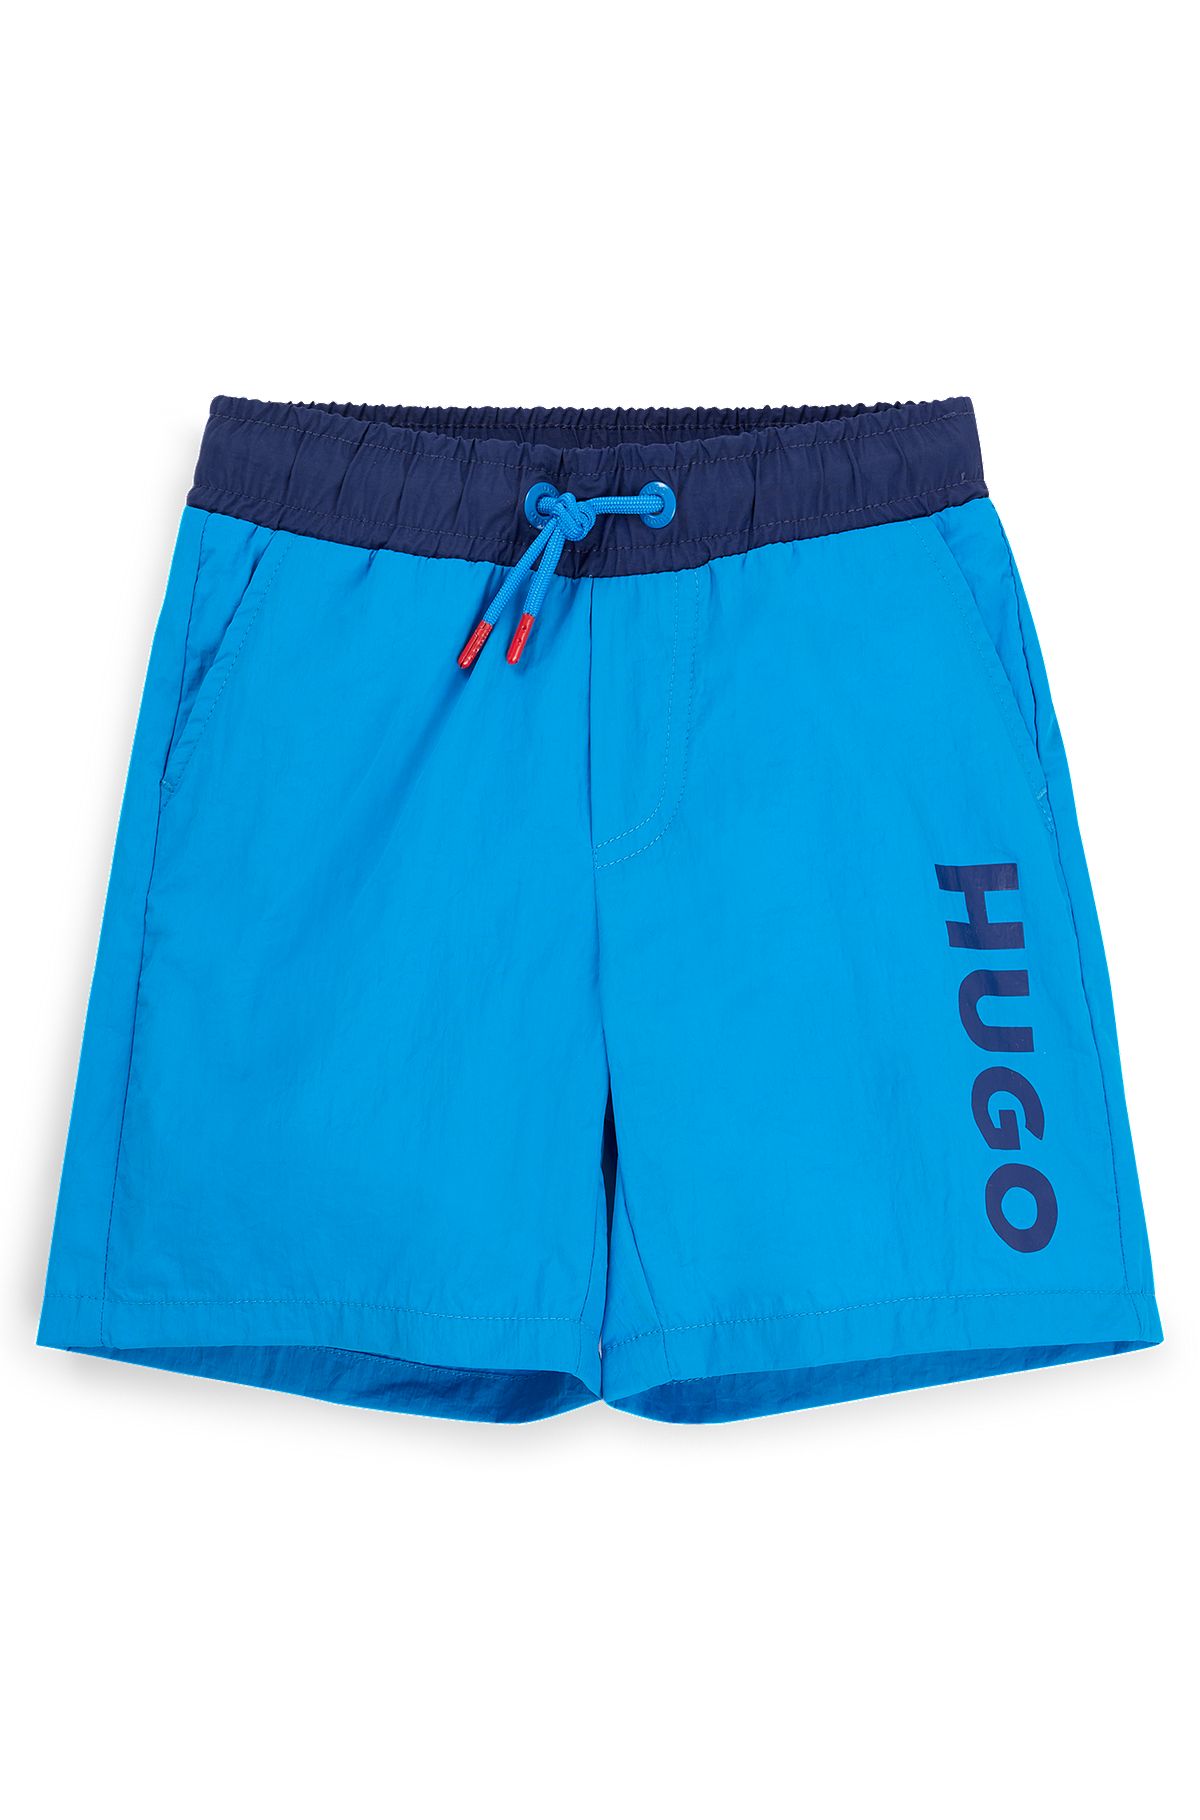 Kids' quick-dry swim shorts with vertical logo, Blue